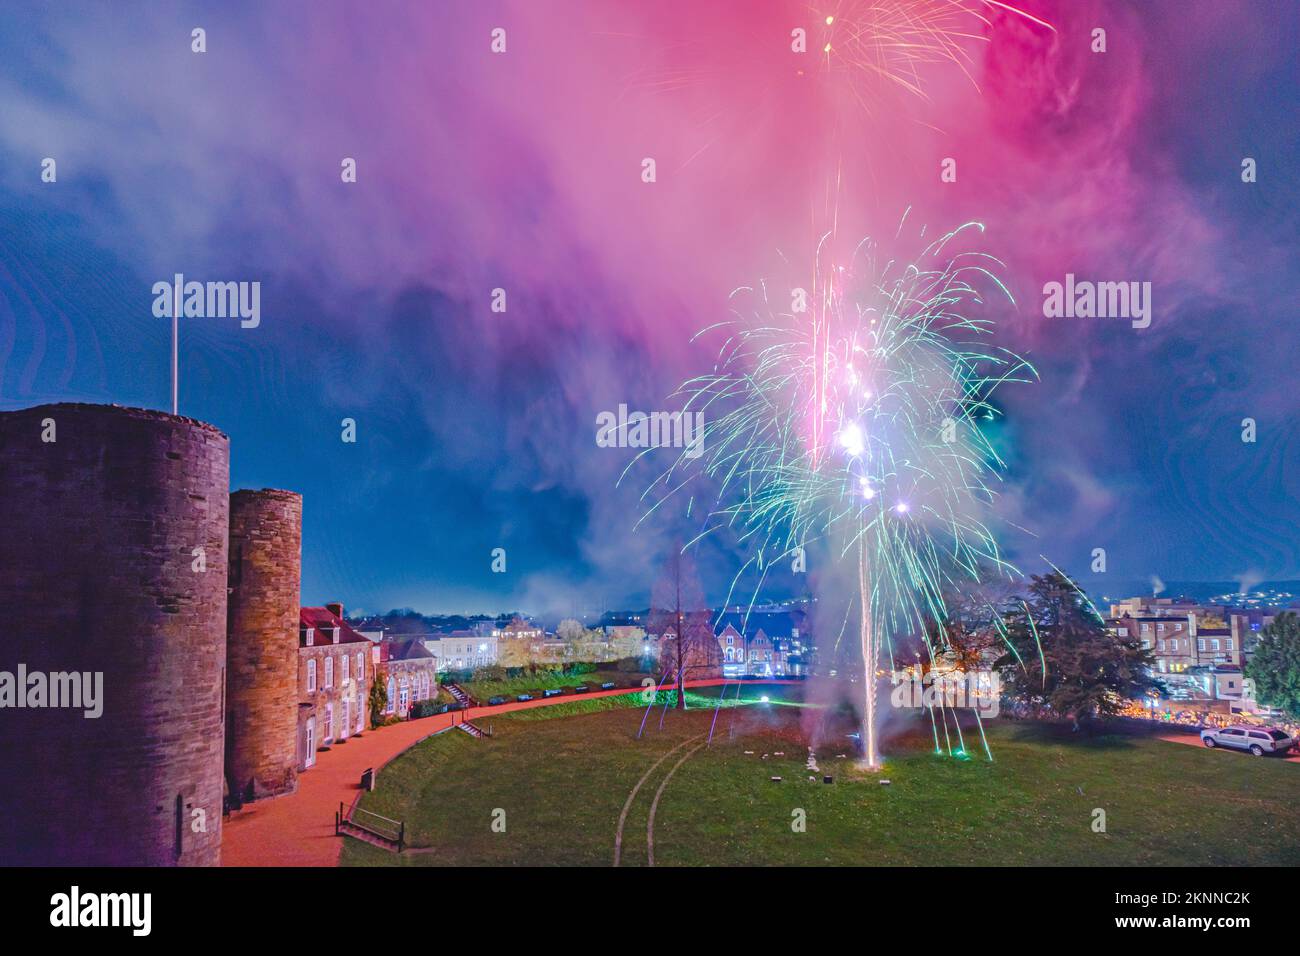 Tonbridge, Kent, England. 26 November 2022. The Medieval 13th Century Tonbridge Castle viewed from the Motte, lit by a fireworks finale following the Christmas Lights switch on in this market town in Kent. ©Sarah Mott / Alamy Live News. Stock Photo